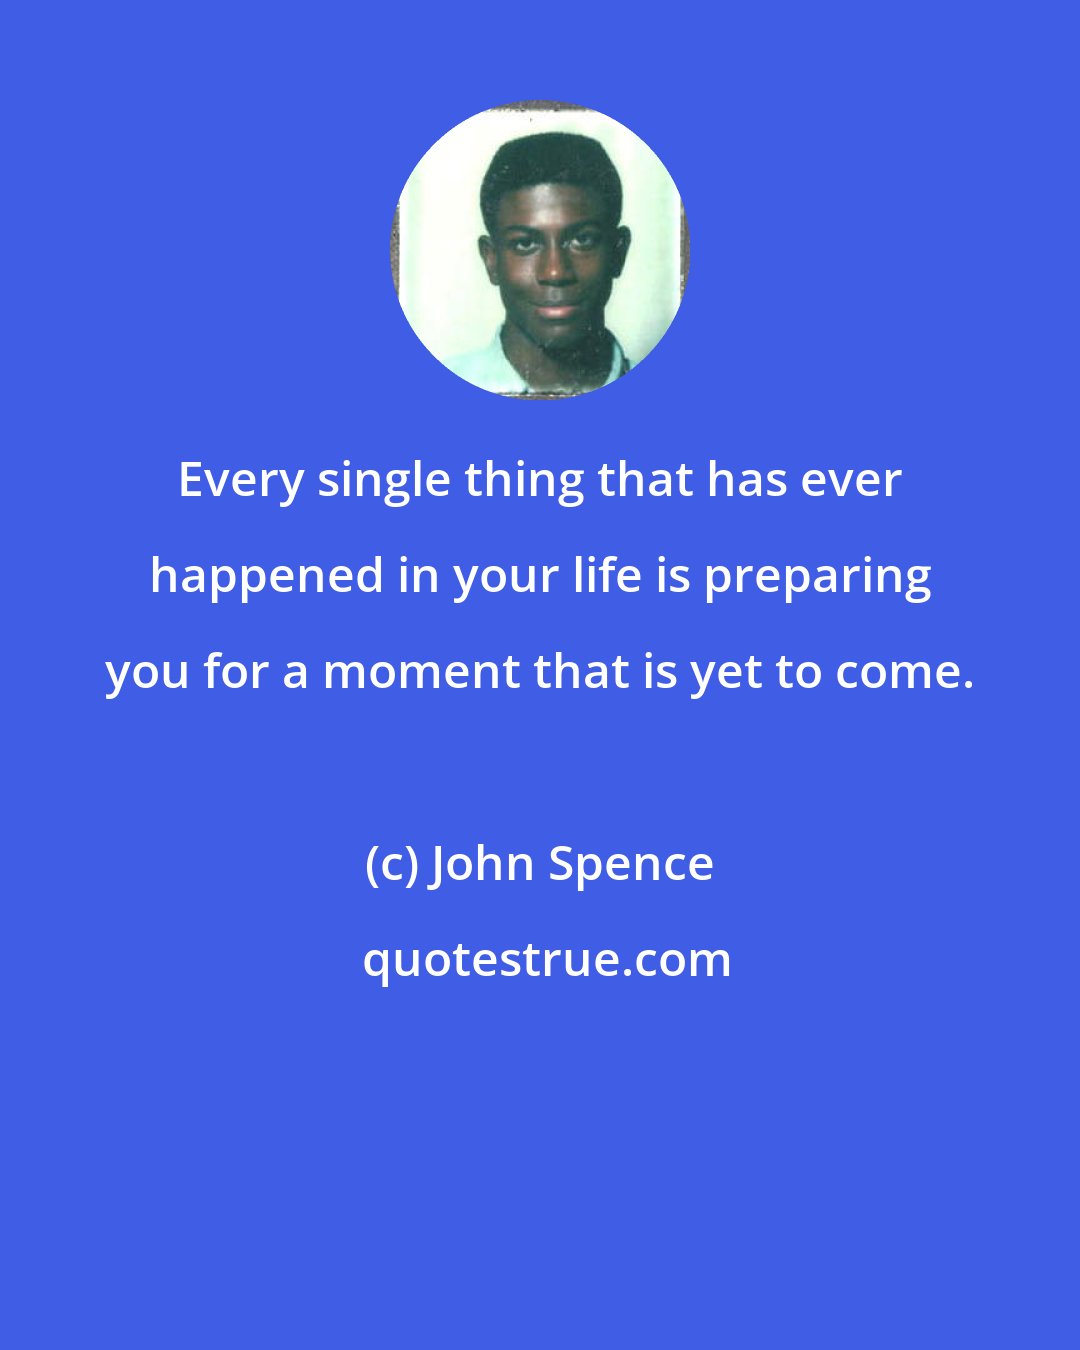 John Spence: Every single thing that has ever happened in your life is preparing you for a moment that is yet to come.